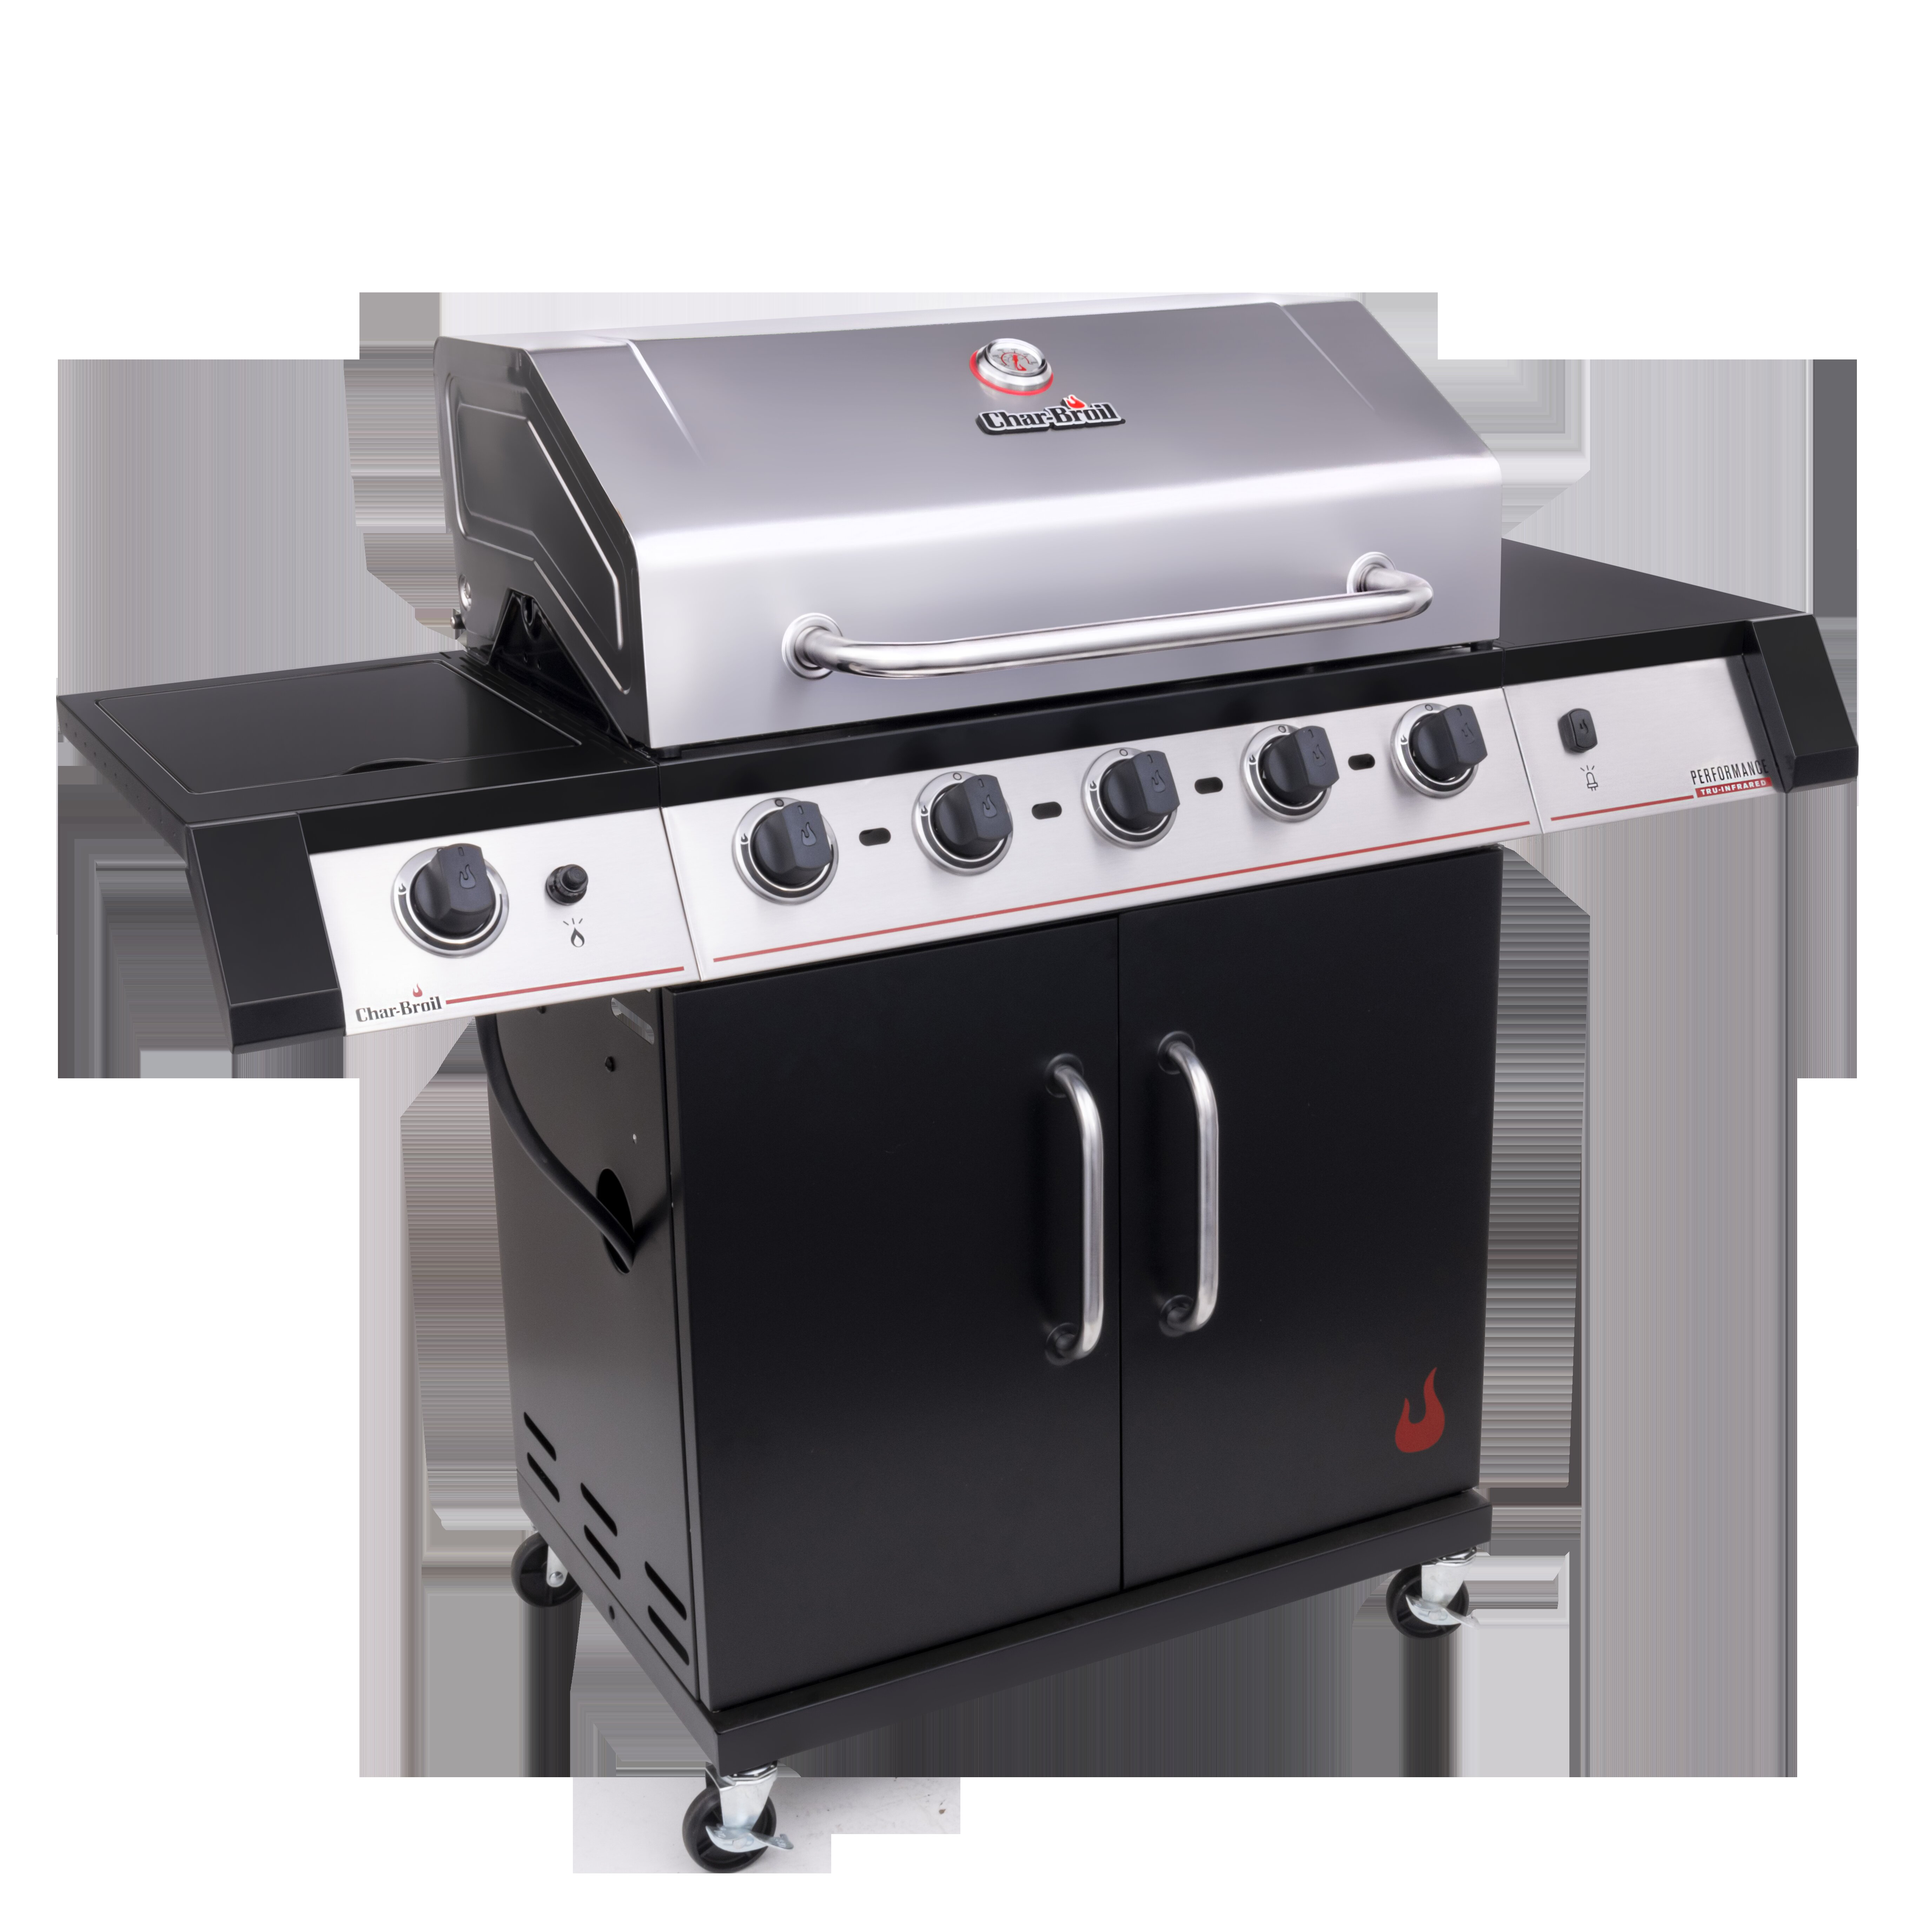 CharBroil Char-Broil 5 - Burner Free Standing Liquid Propane Infrared 28000  BTU Gas Grill with Side Burner and Cabinet & Reviews | Wayfair Classic Grill Replacement Wayfair